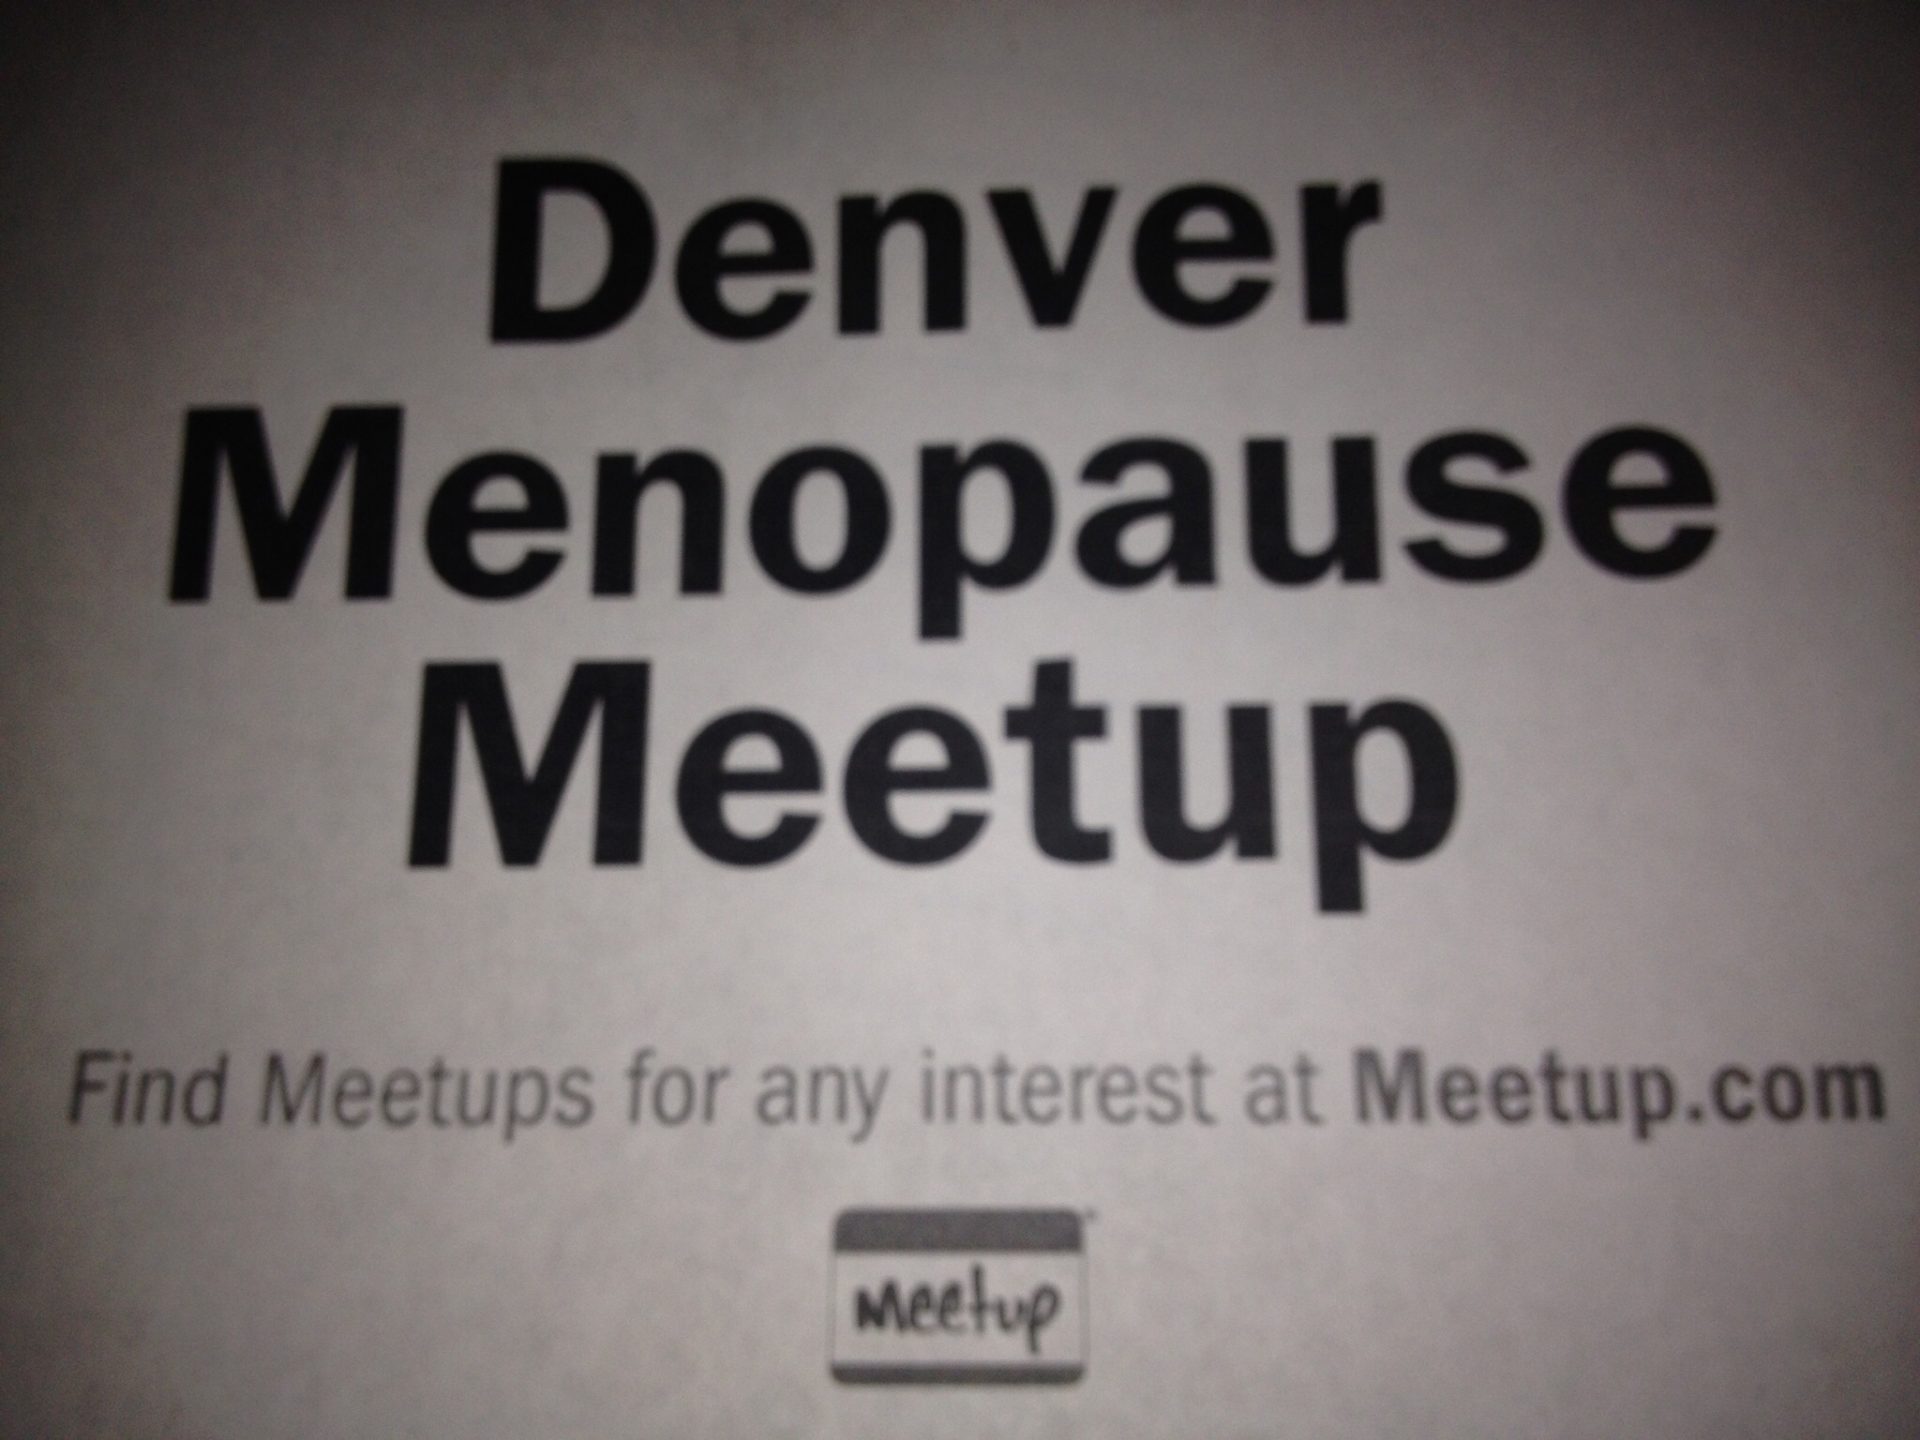 Menopause Meetup last Sunday of every month in 2015!